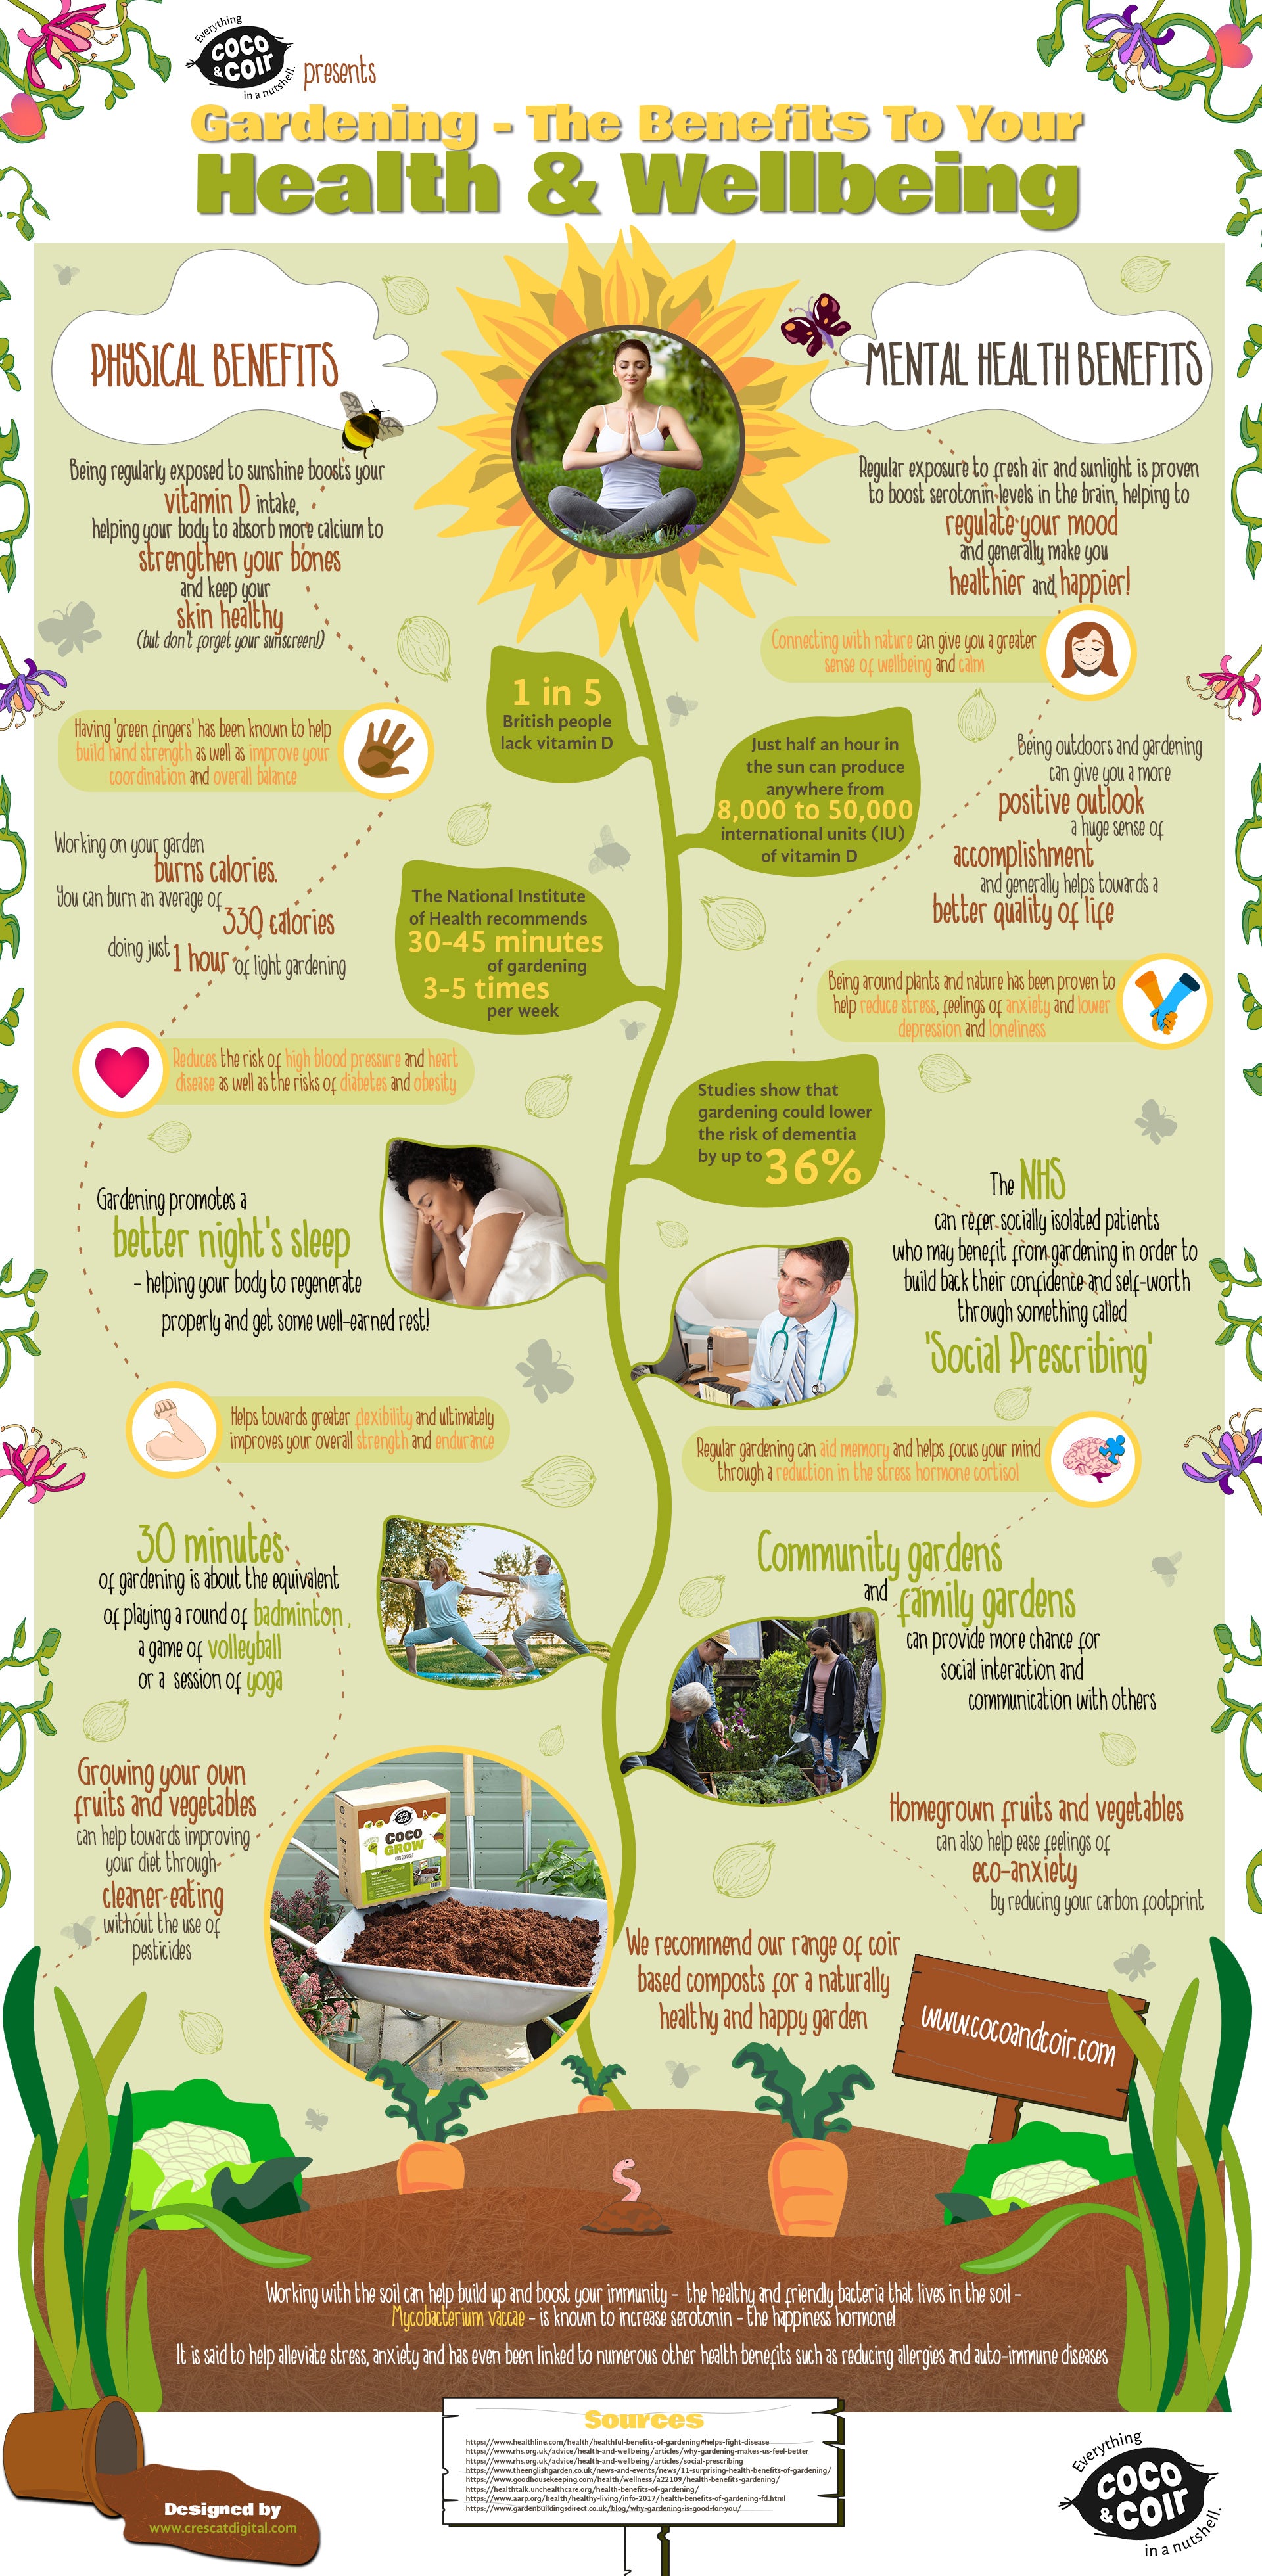 Gardening - The Benefits To Your Health and Wellbeing